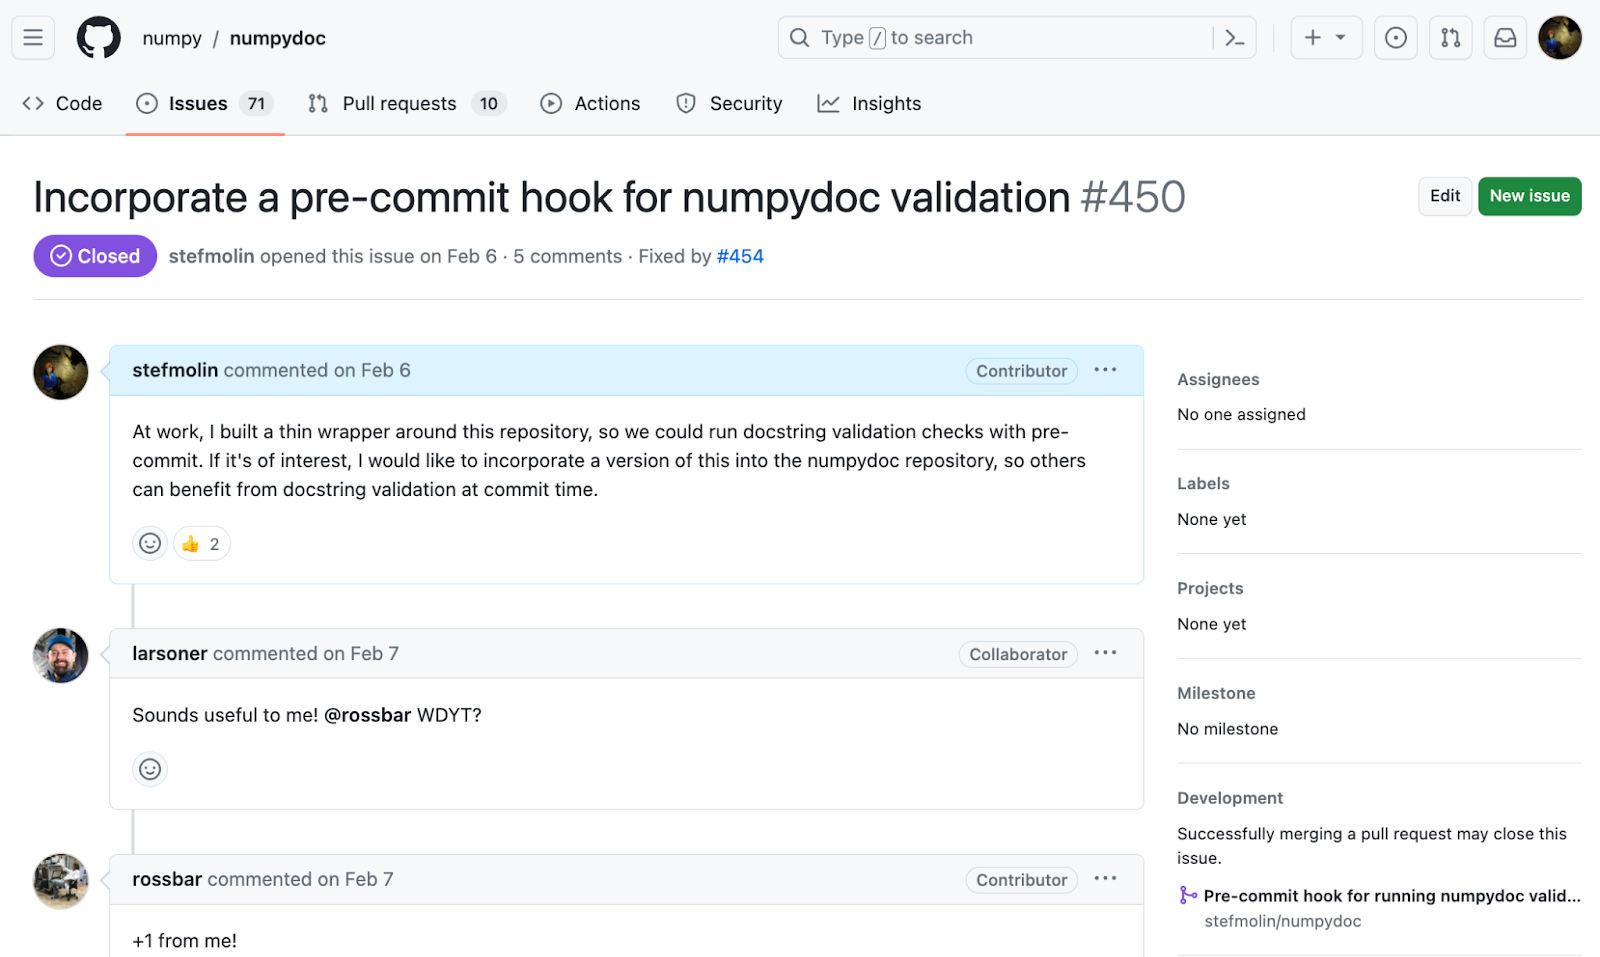 developing a pre-commit hook for numpydoc